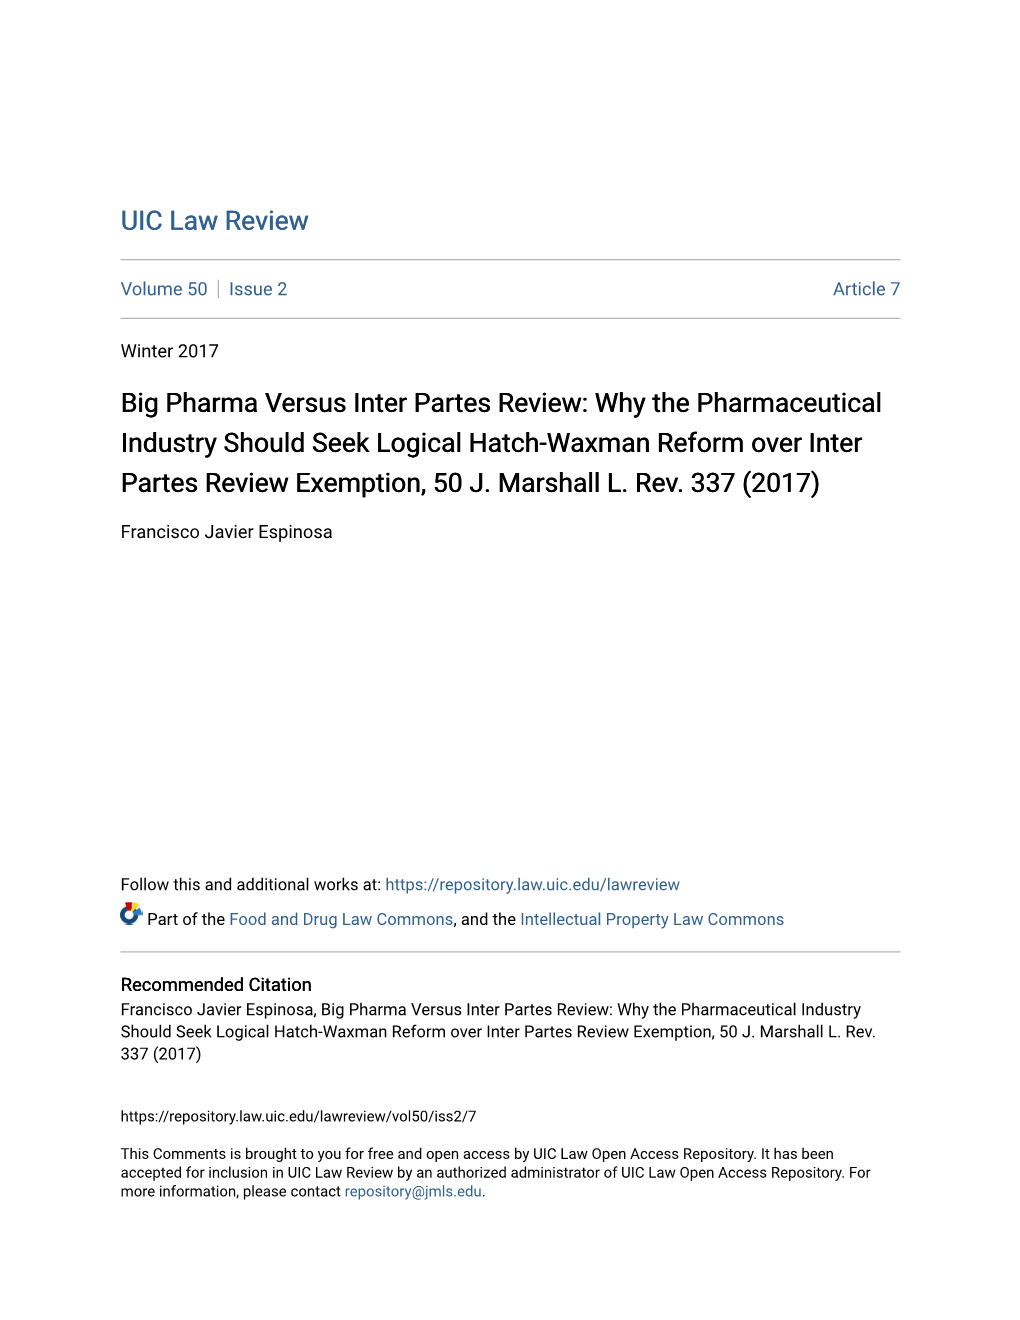 Big Pharma Versus Inter Partes Review: Why the Pharmaceutical Industry Should Seek Logical Hatch-Waxman Reform Over Inter Partes Review Exemption, 50 J